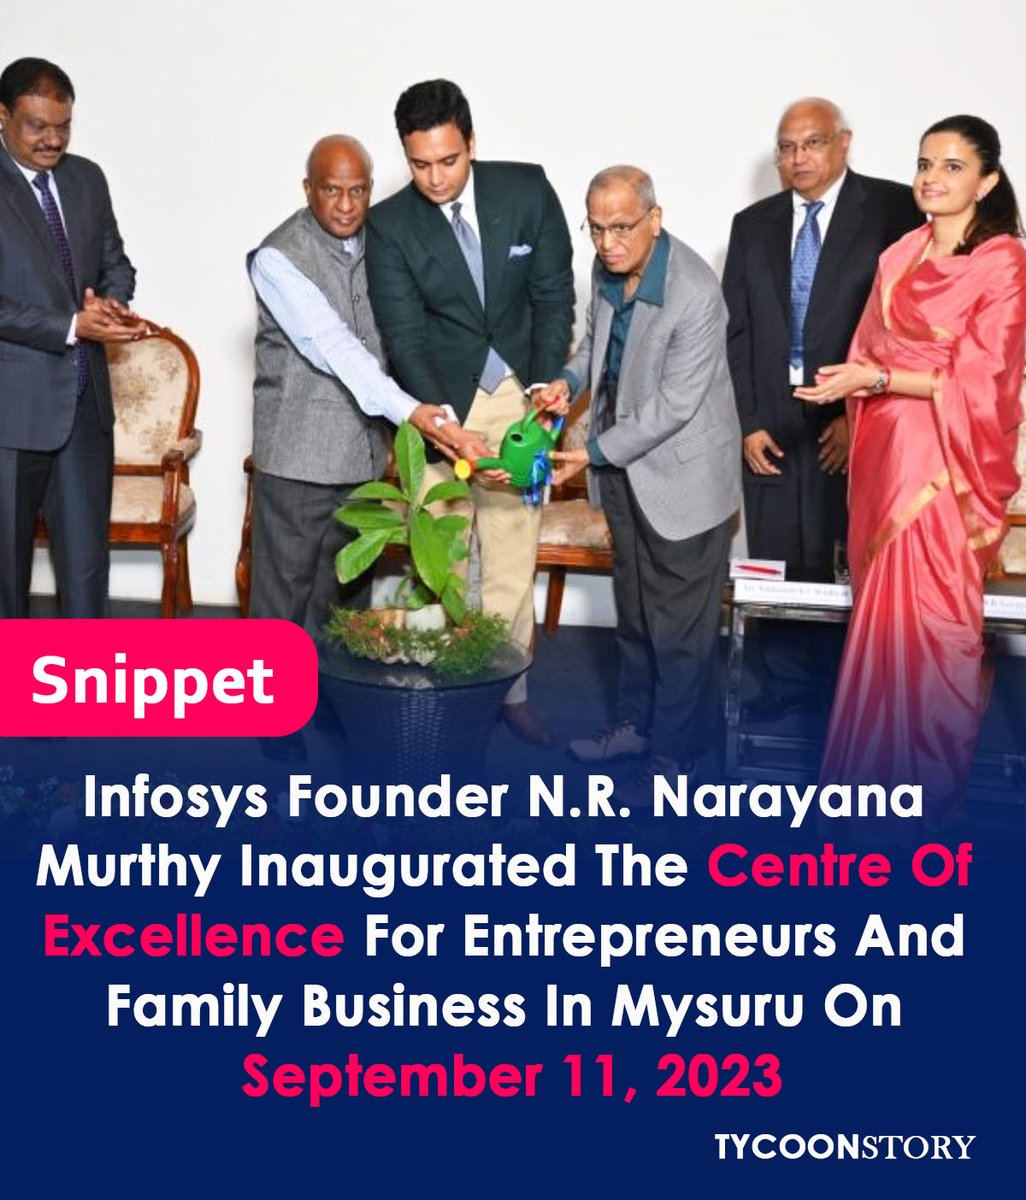 N.R. Narayana Murthy, the founder of Infosys, inaugurated the Centre of Excellence for Entrepreneurs and Family Business in Mysuru on September 11, 2023
#NRNarayanaMurthy #FamilyBusinesses #Mysuru #Infopine #Infosys #venturecapital #Innovation #BusinessGrowth @Online_Courses